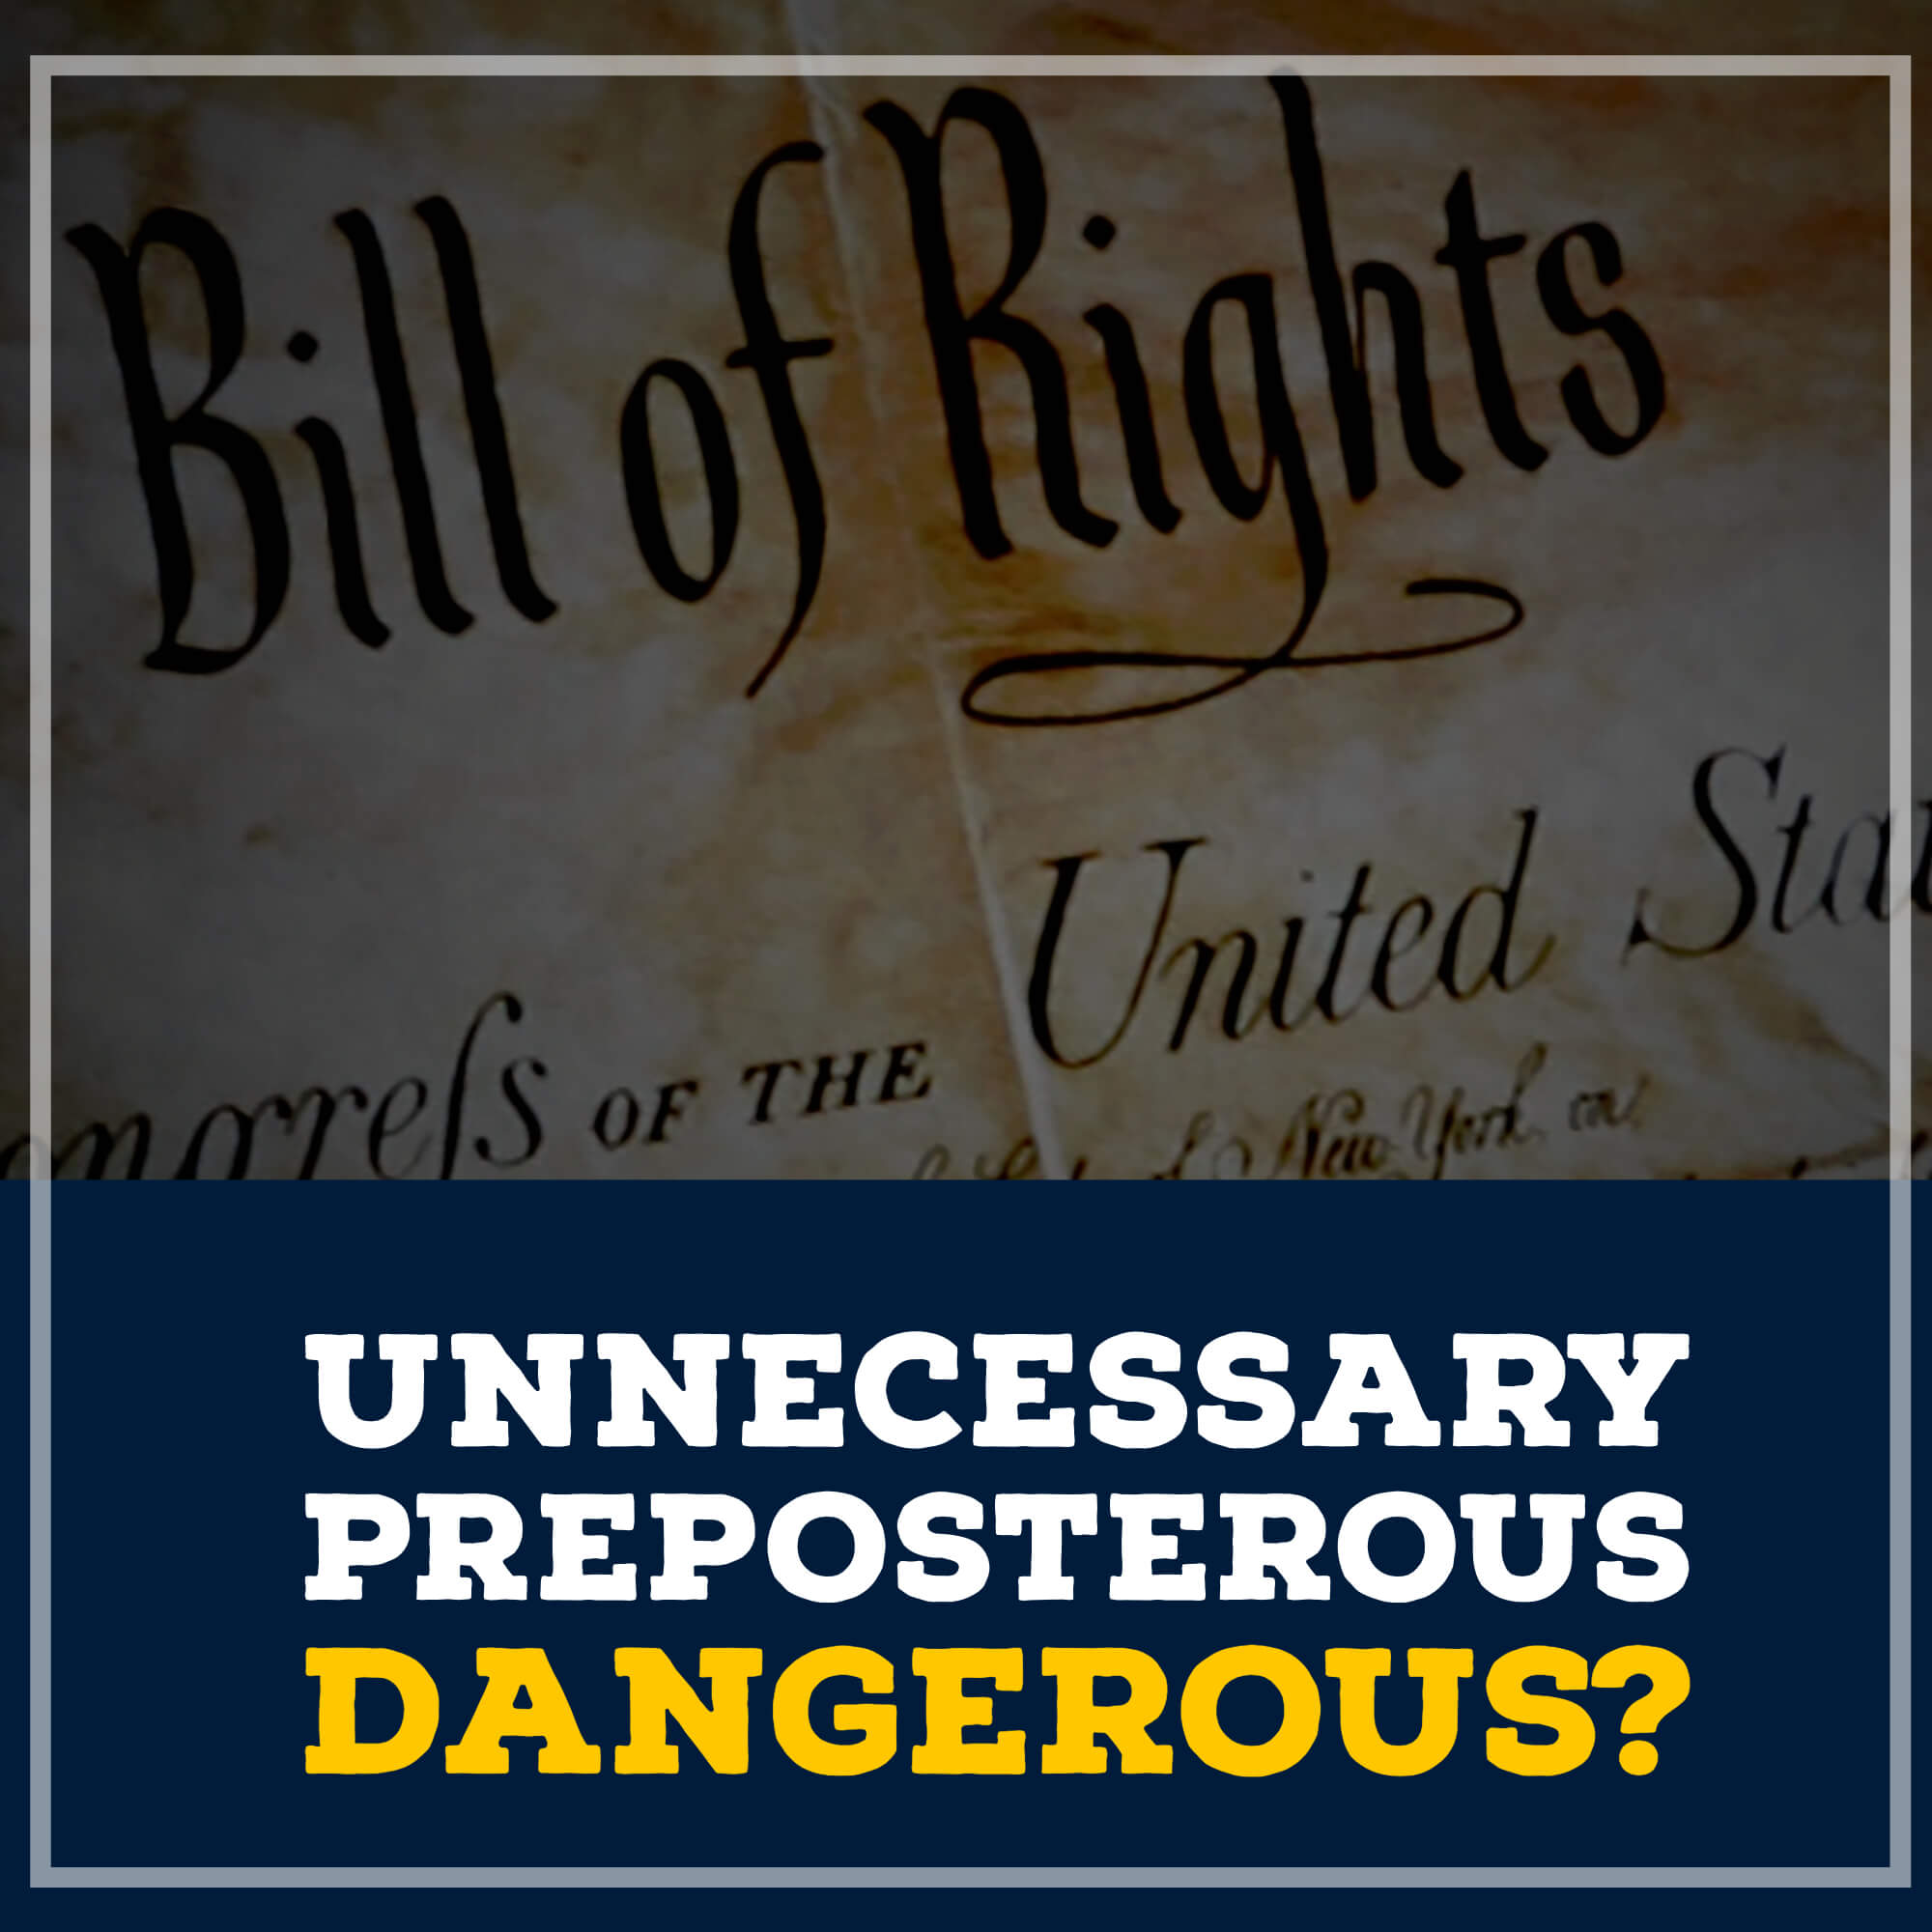 Bill of Rights: Unnecessary and Dangerous?